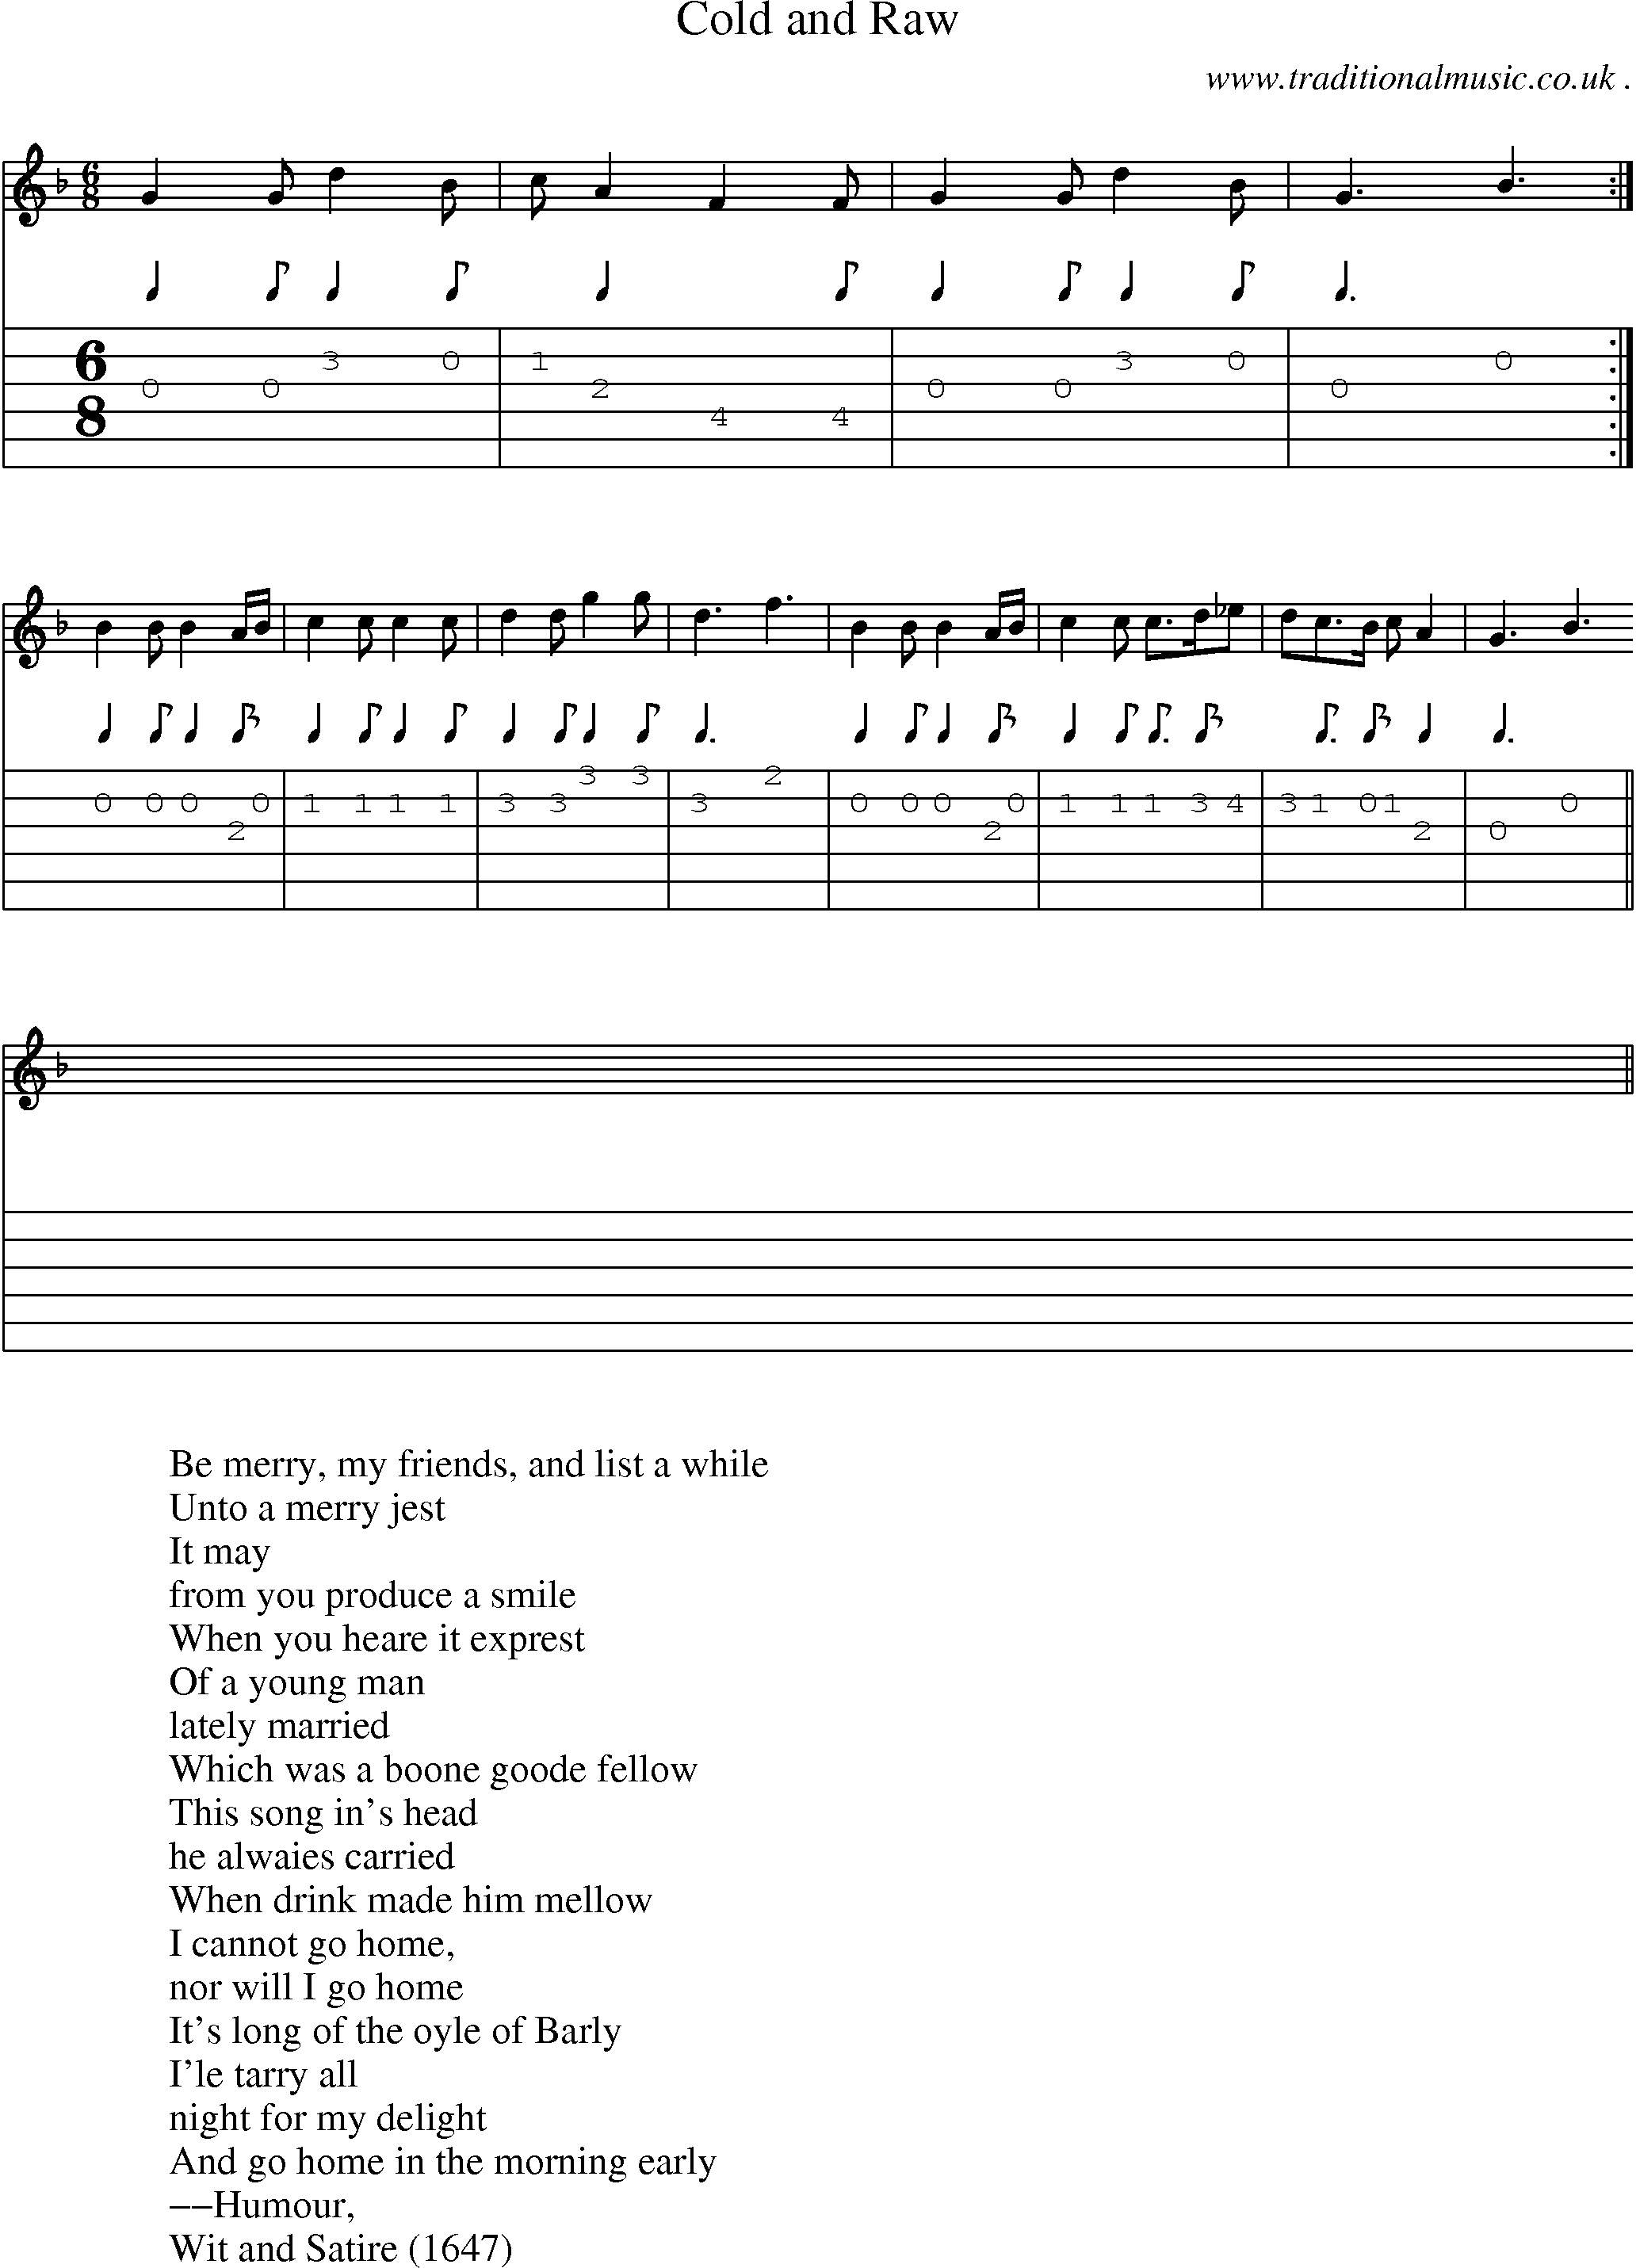 Sheet-Music and Guitar Tabs for Cold And Raw